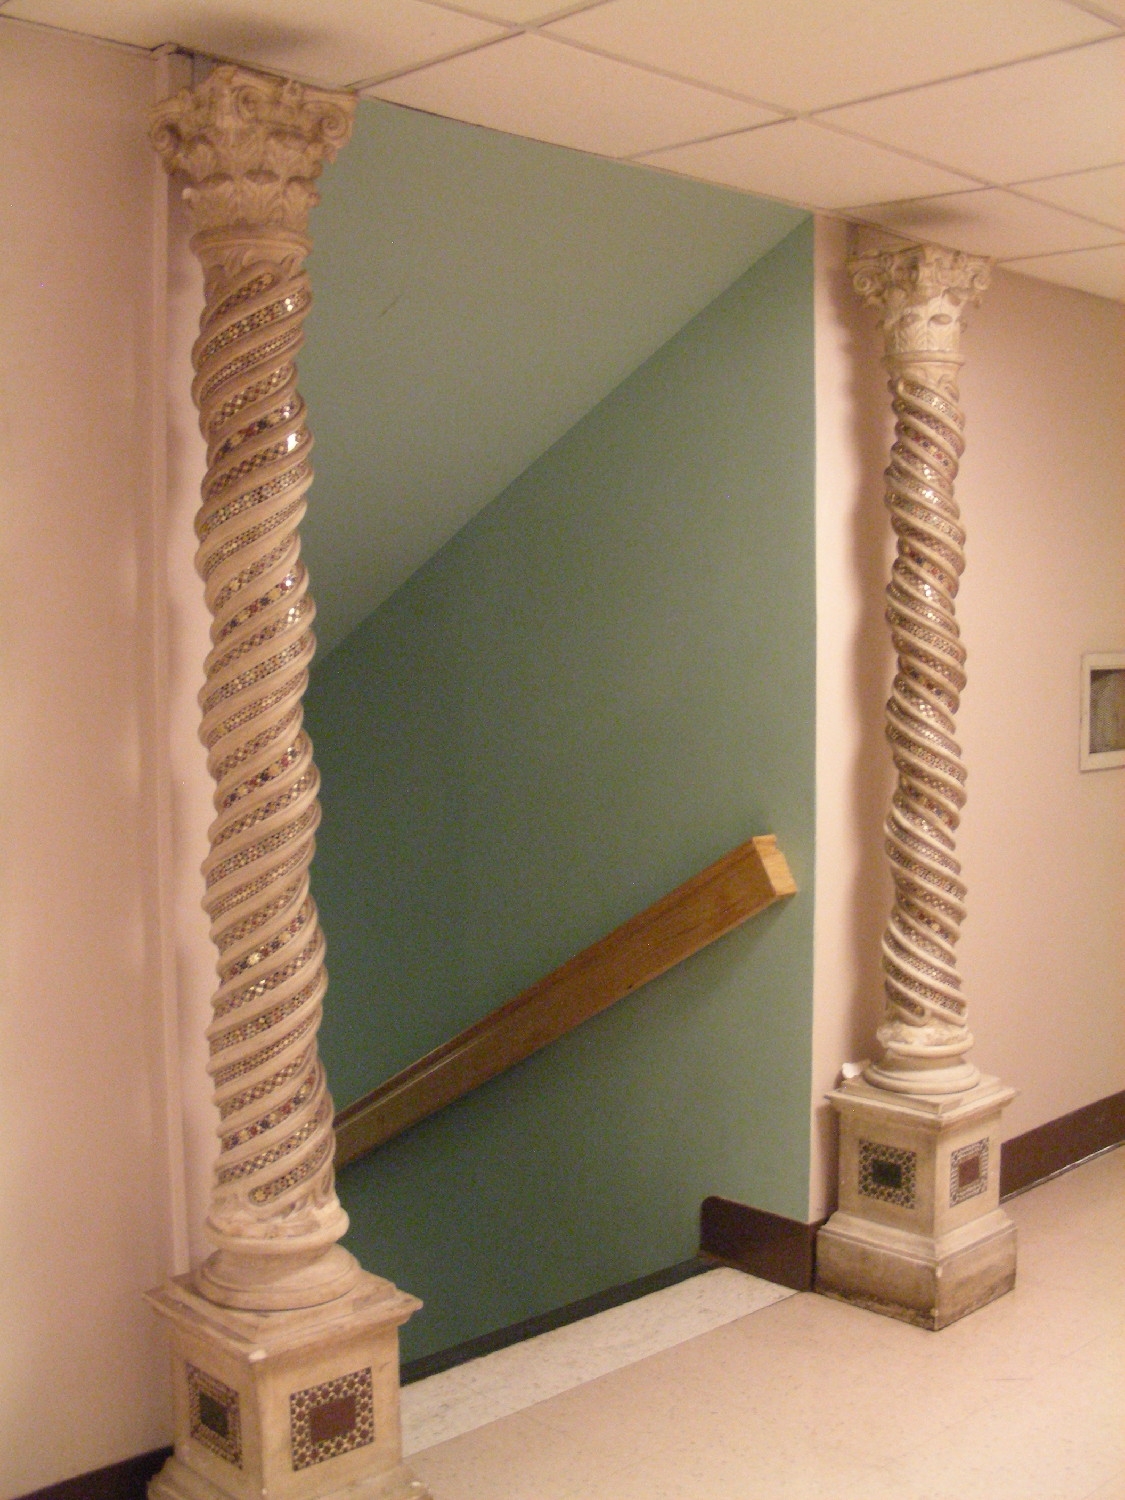 View of the two Byzantine-style pillars at the entrance to the staircase leading to the prayer room